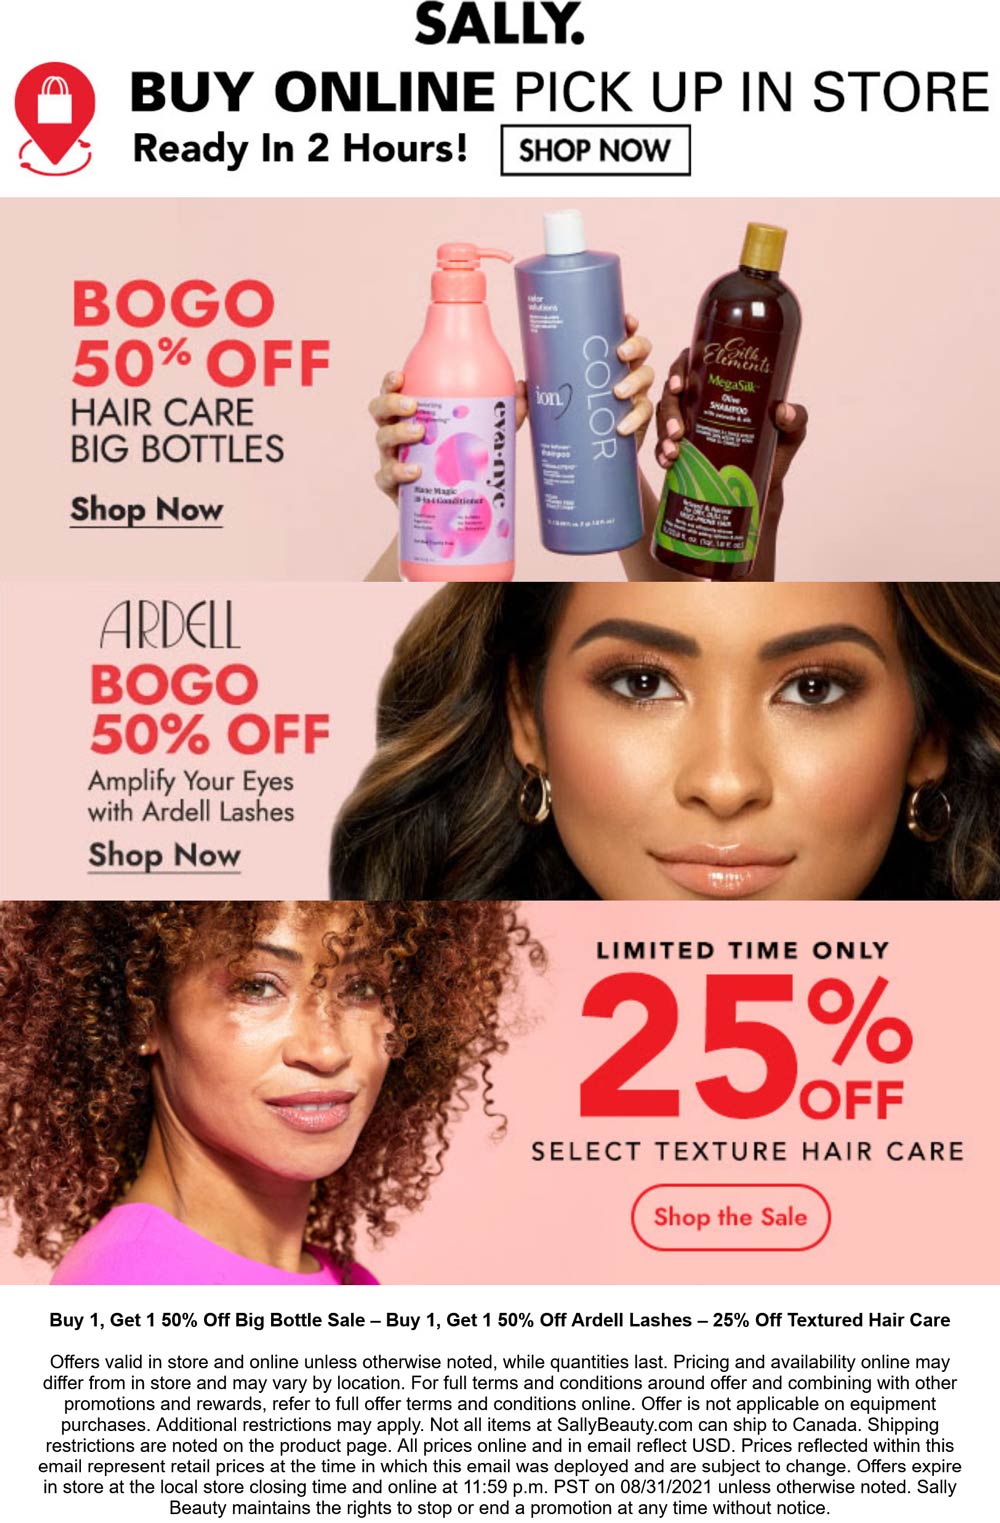 Sally Beauty stores Coupon  Second big bottle 50% off & more at Sally Beauty, ditto online #sallybeauty 